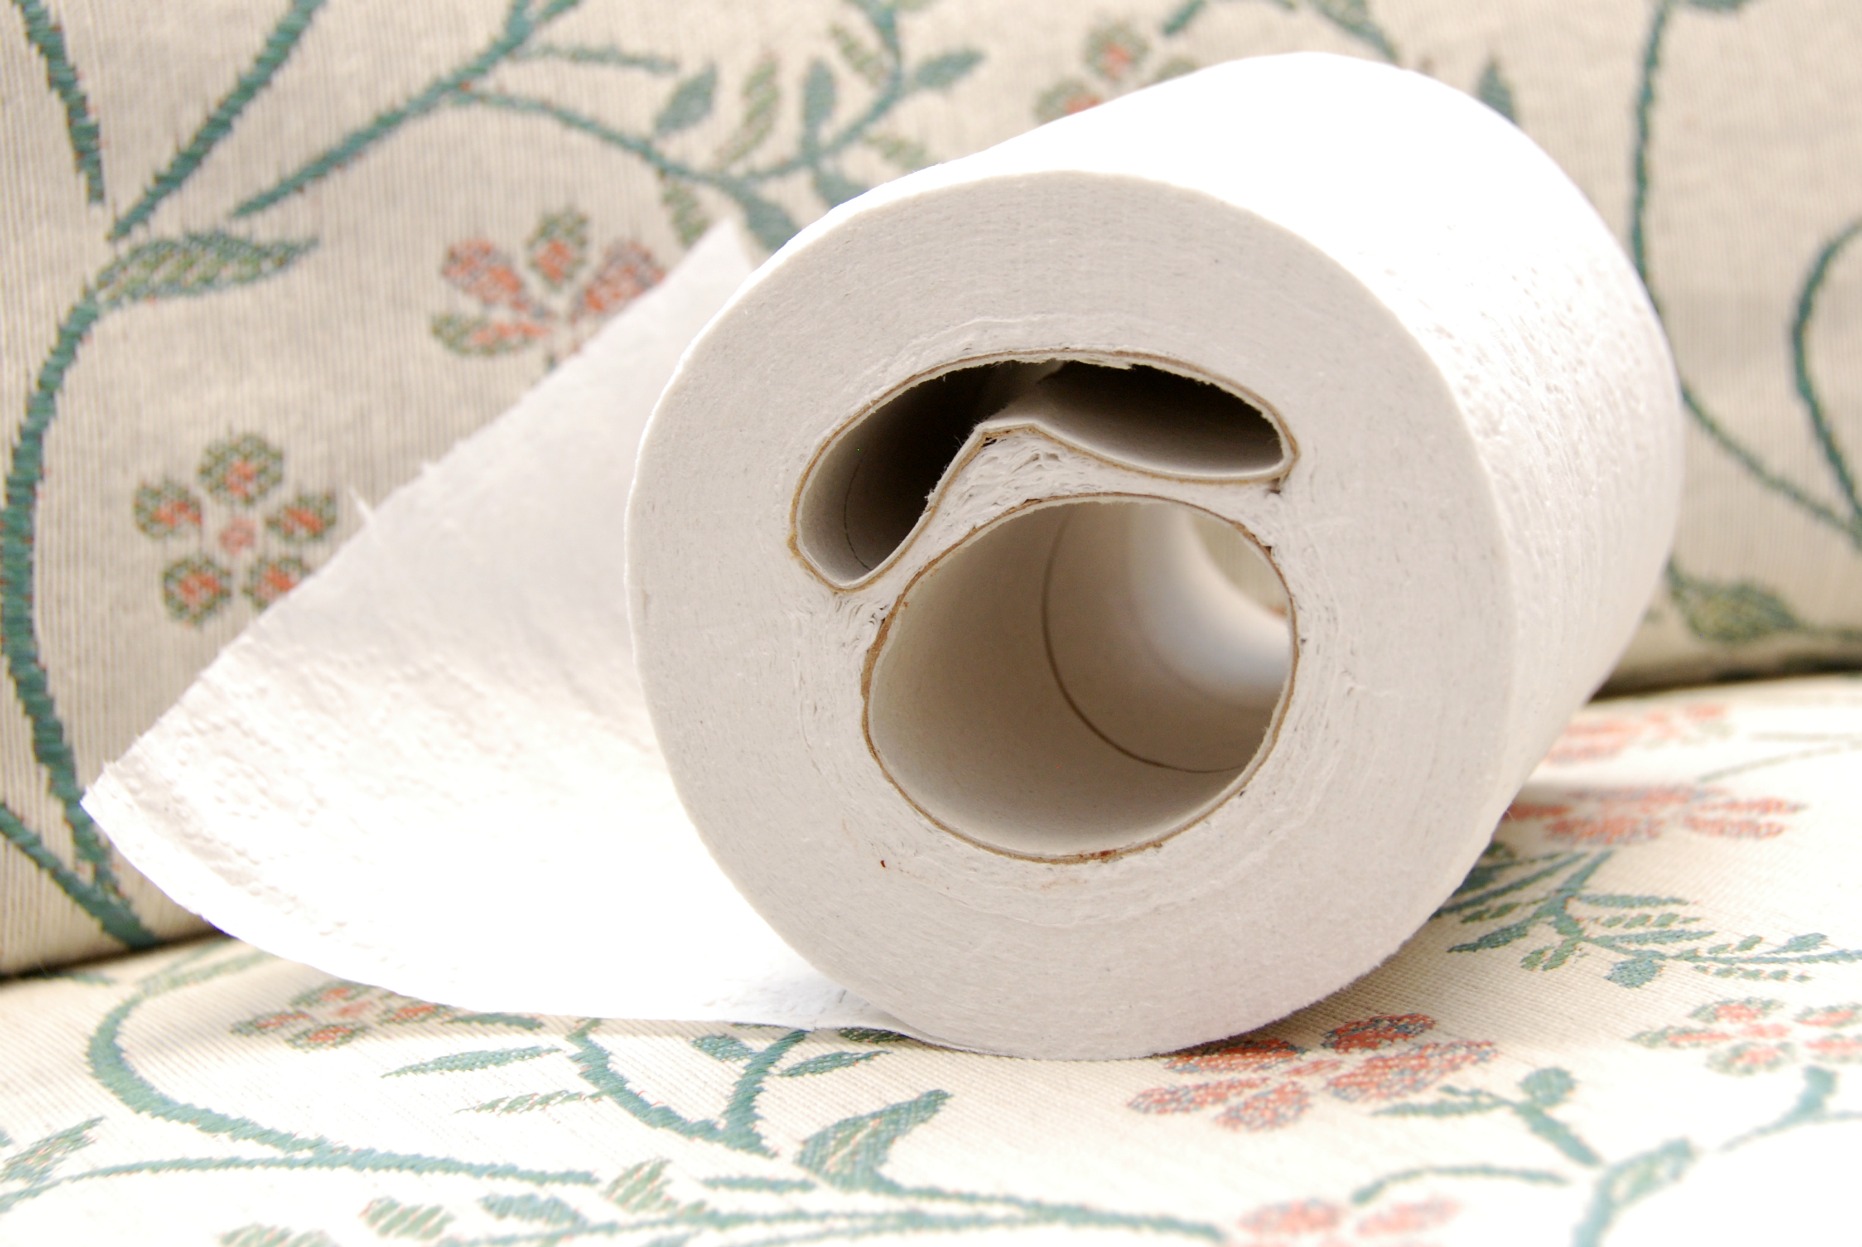 an image of a roll of toilet paper on floral print